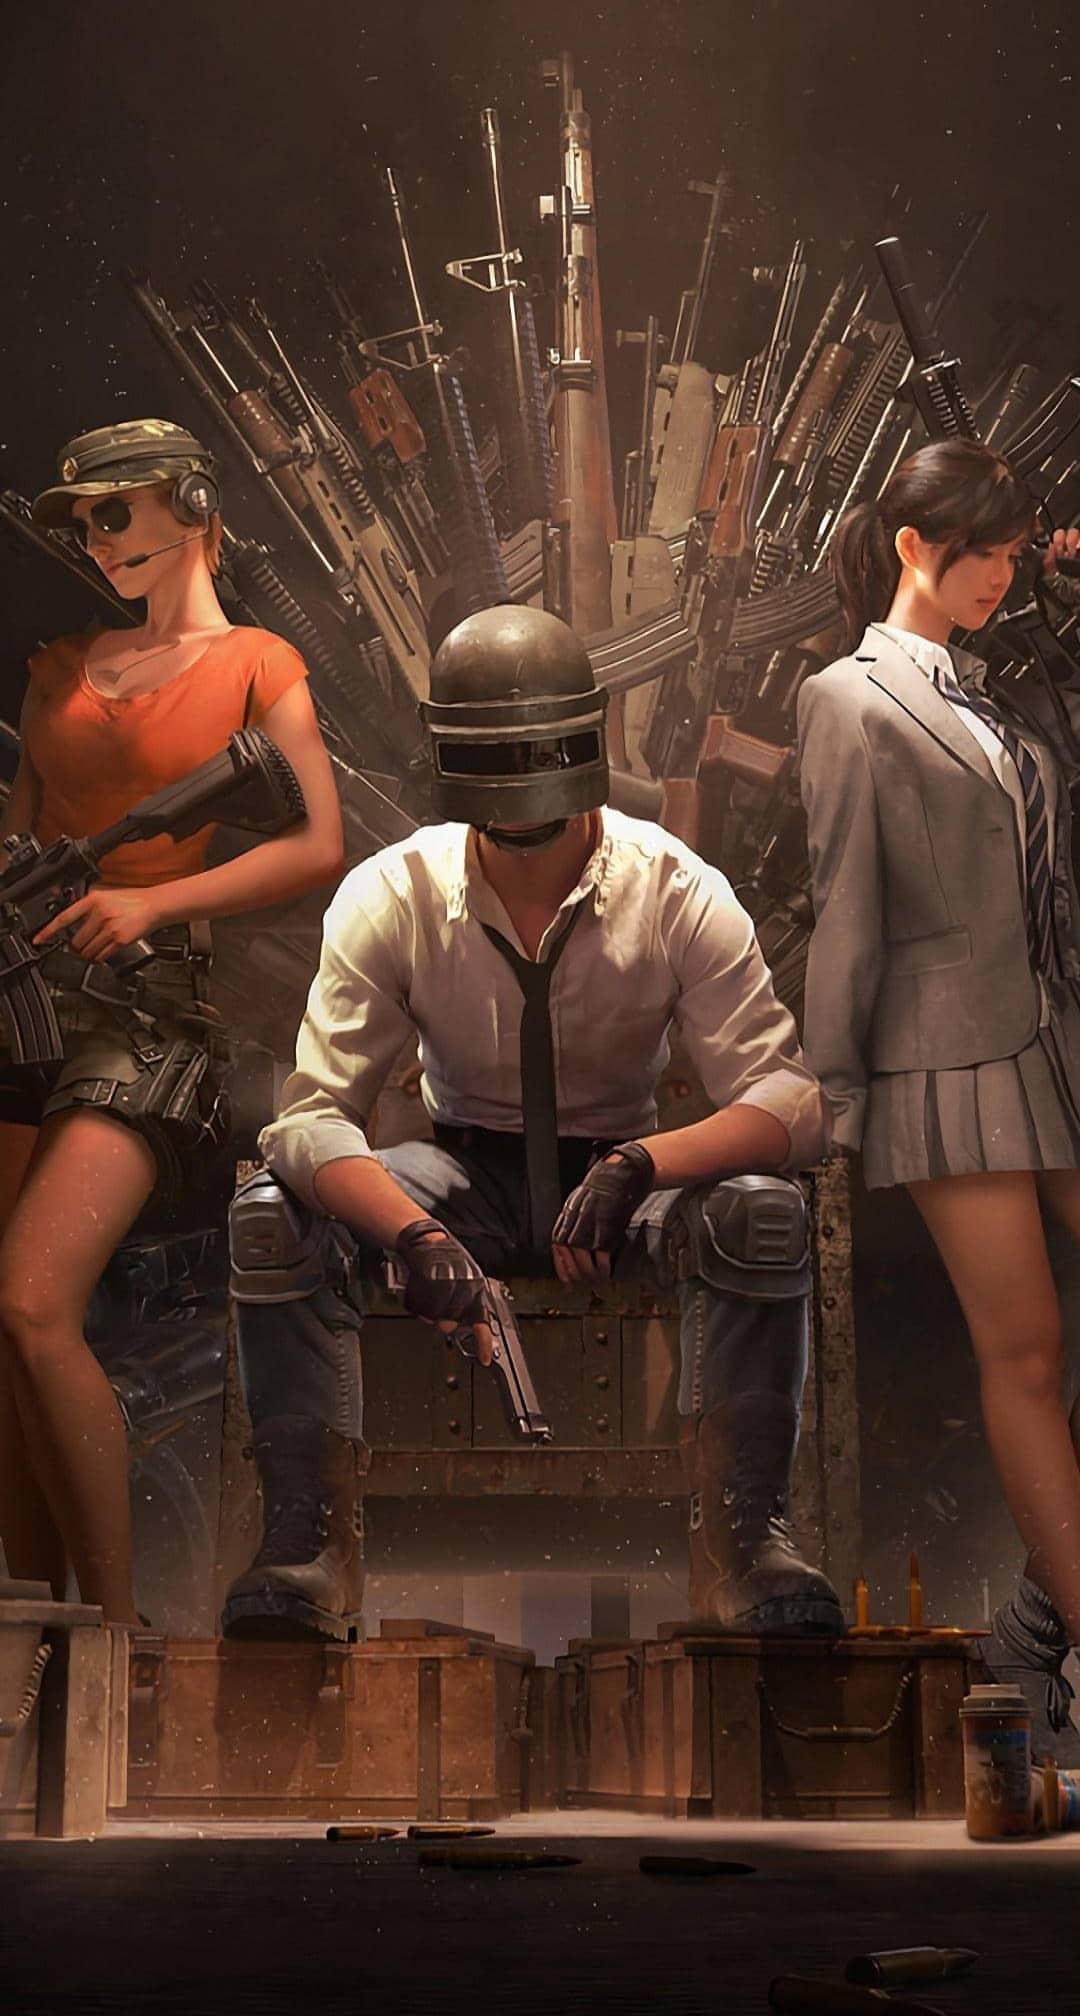 4k Pubg Wallpaper 2019 For Android Apk Download